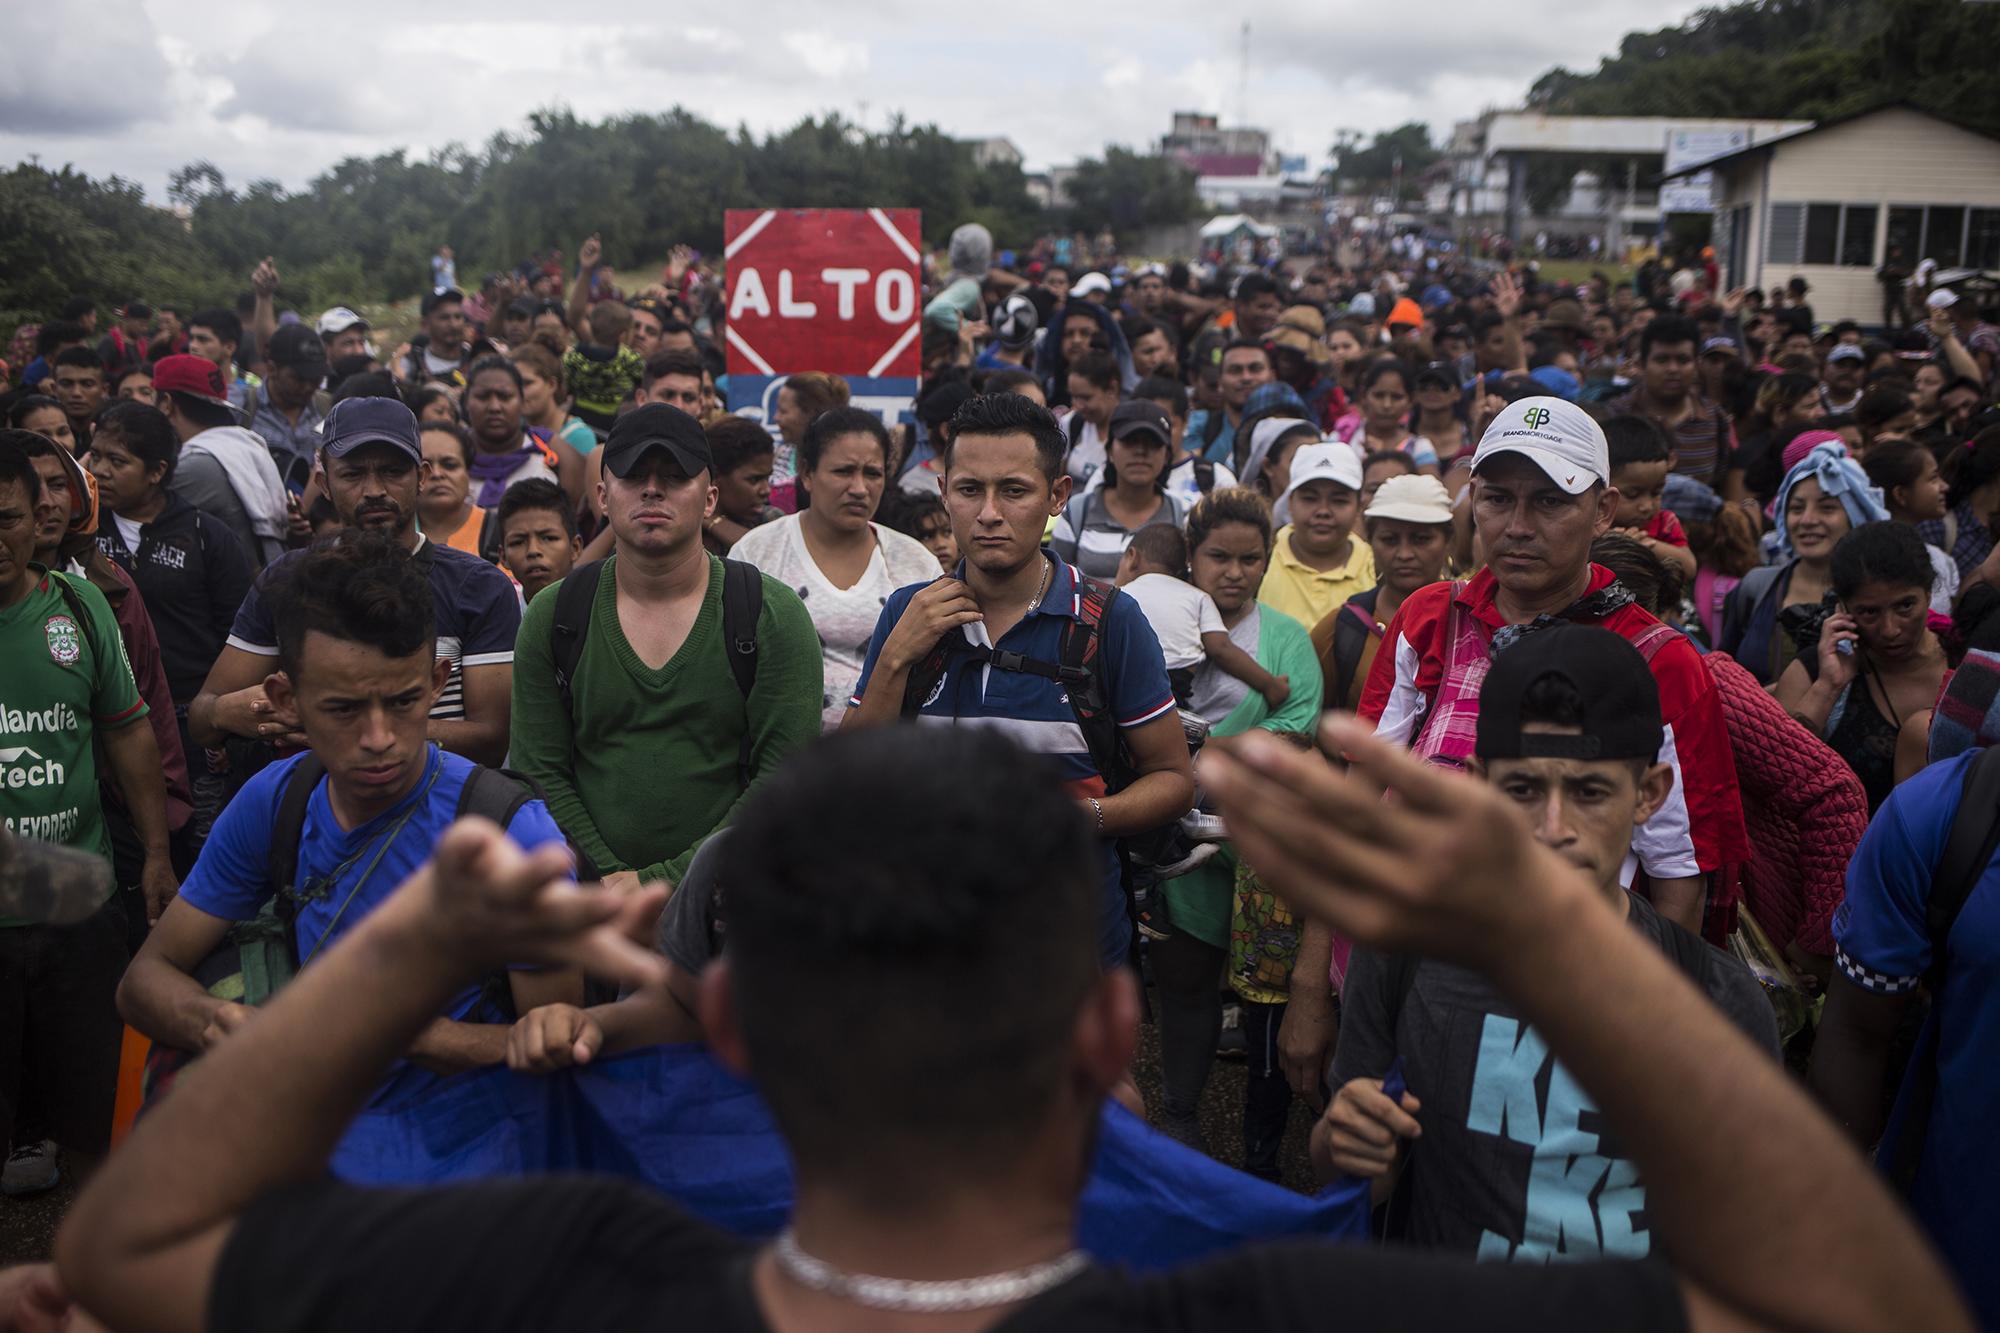 At the Guatemalan border crossing into Mexico in El Ceibo, Petén, this migrant caravan was detained and deported by Mexican customs officials in January of 2020. Photo: Víctor Peña/El Faro